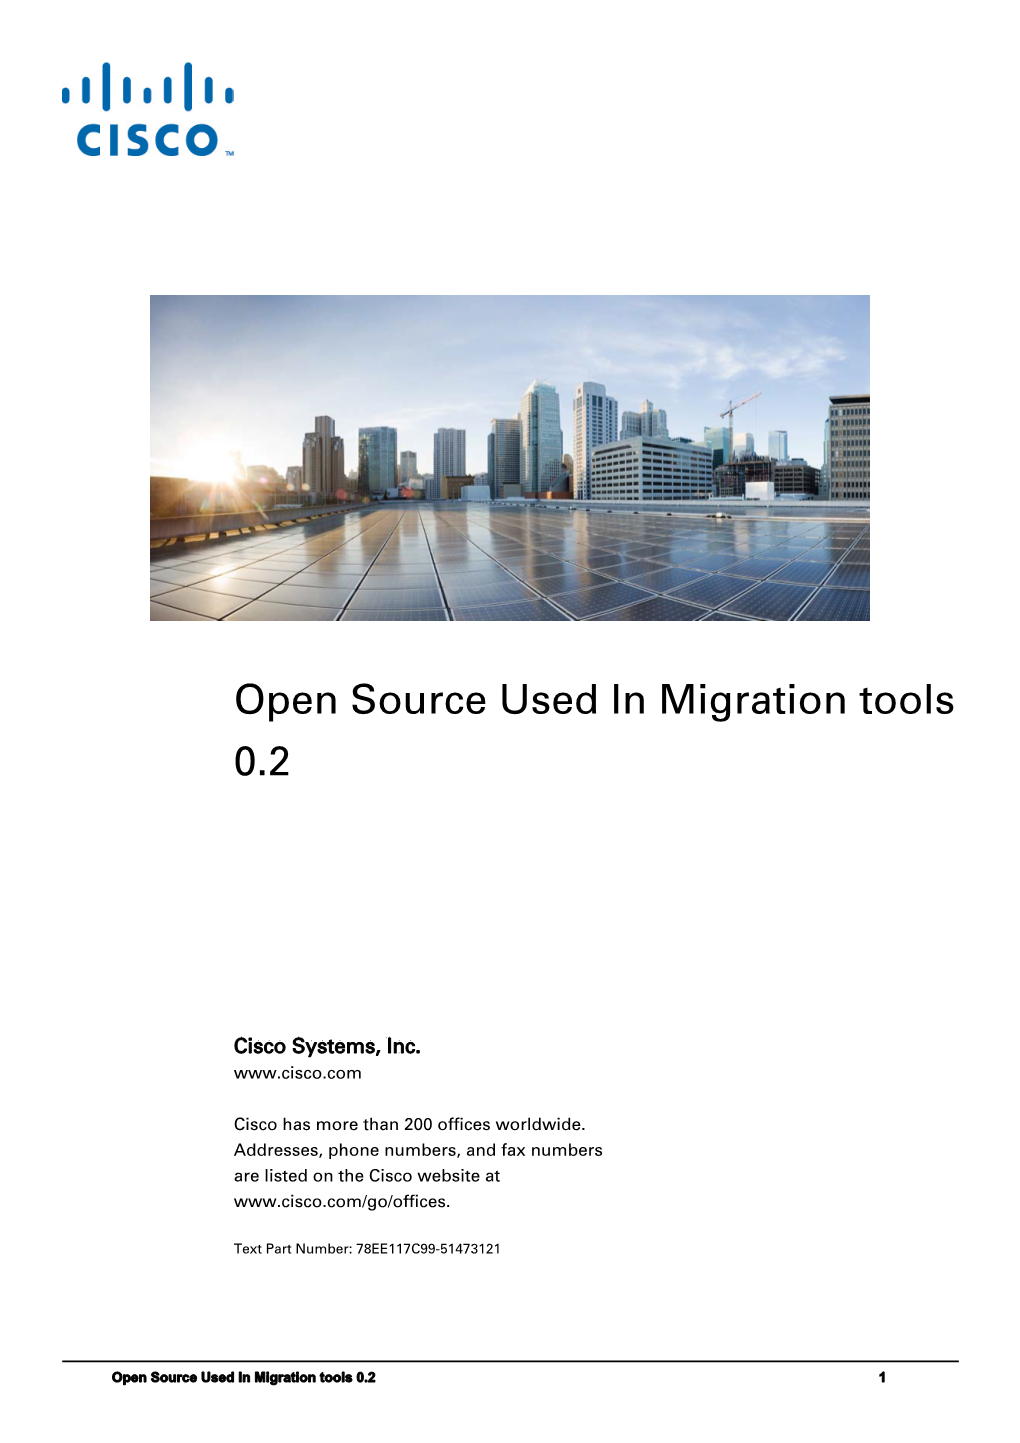 Open Source Used in Migration Tools 0.2